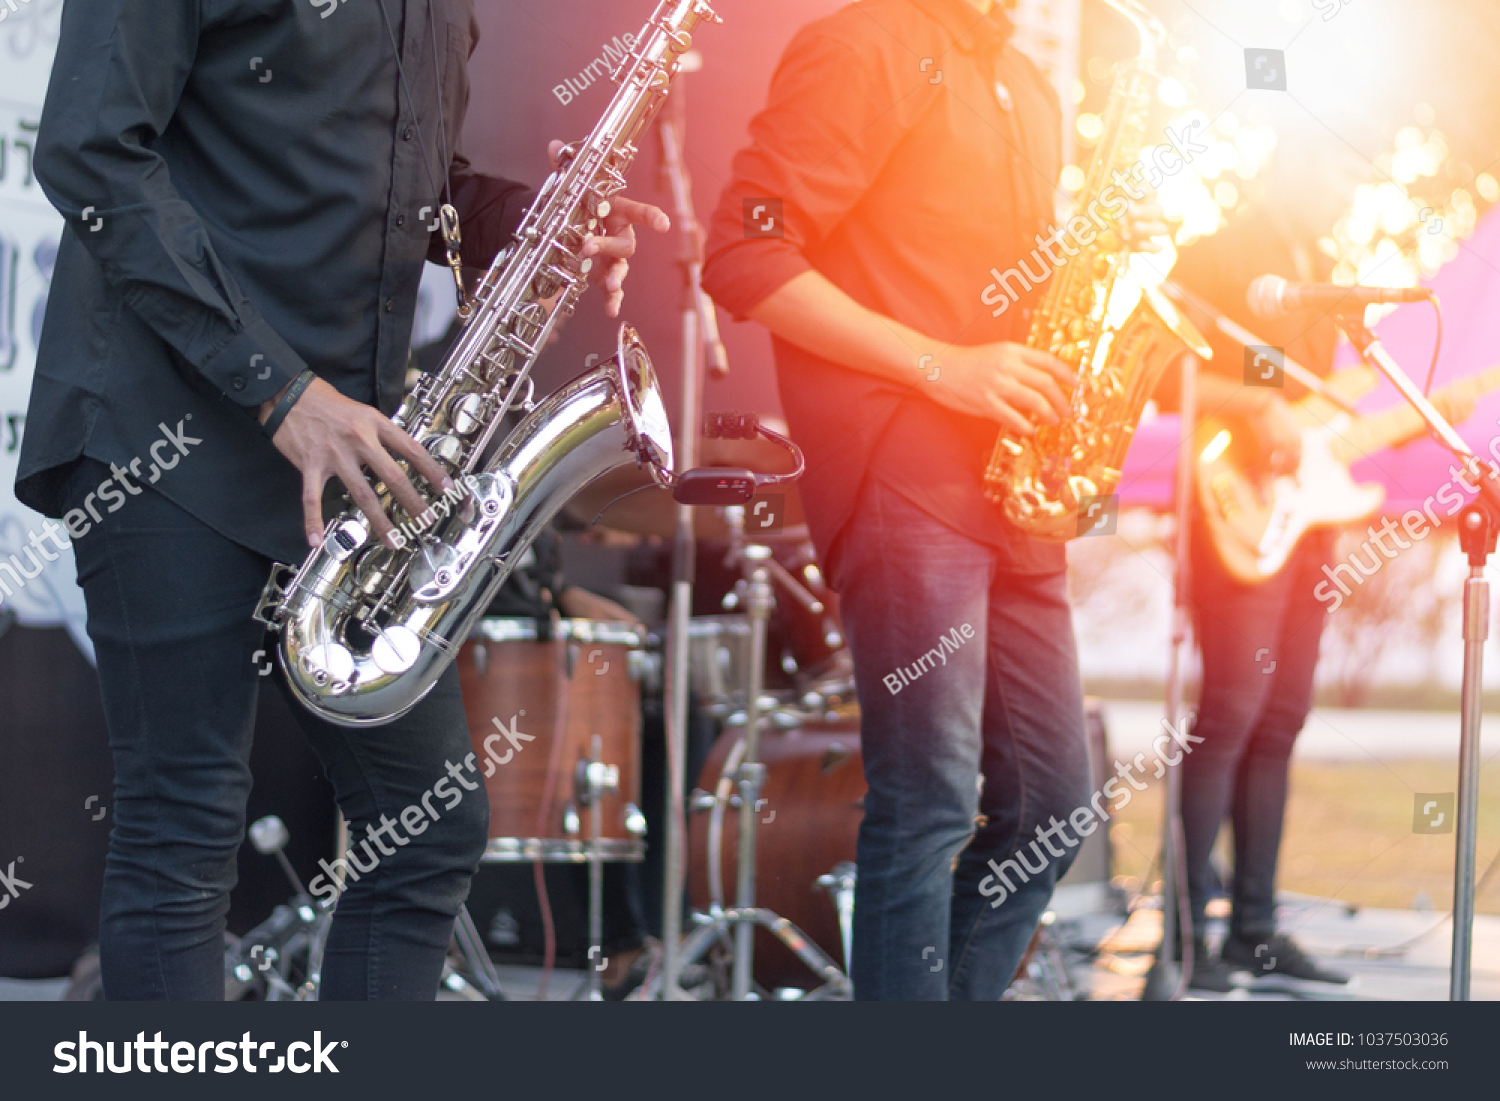 World Jazz festival. Saxophone, music instrument played by saxophonist player and band musicians on stage in fest. #1037503036